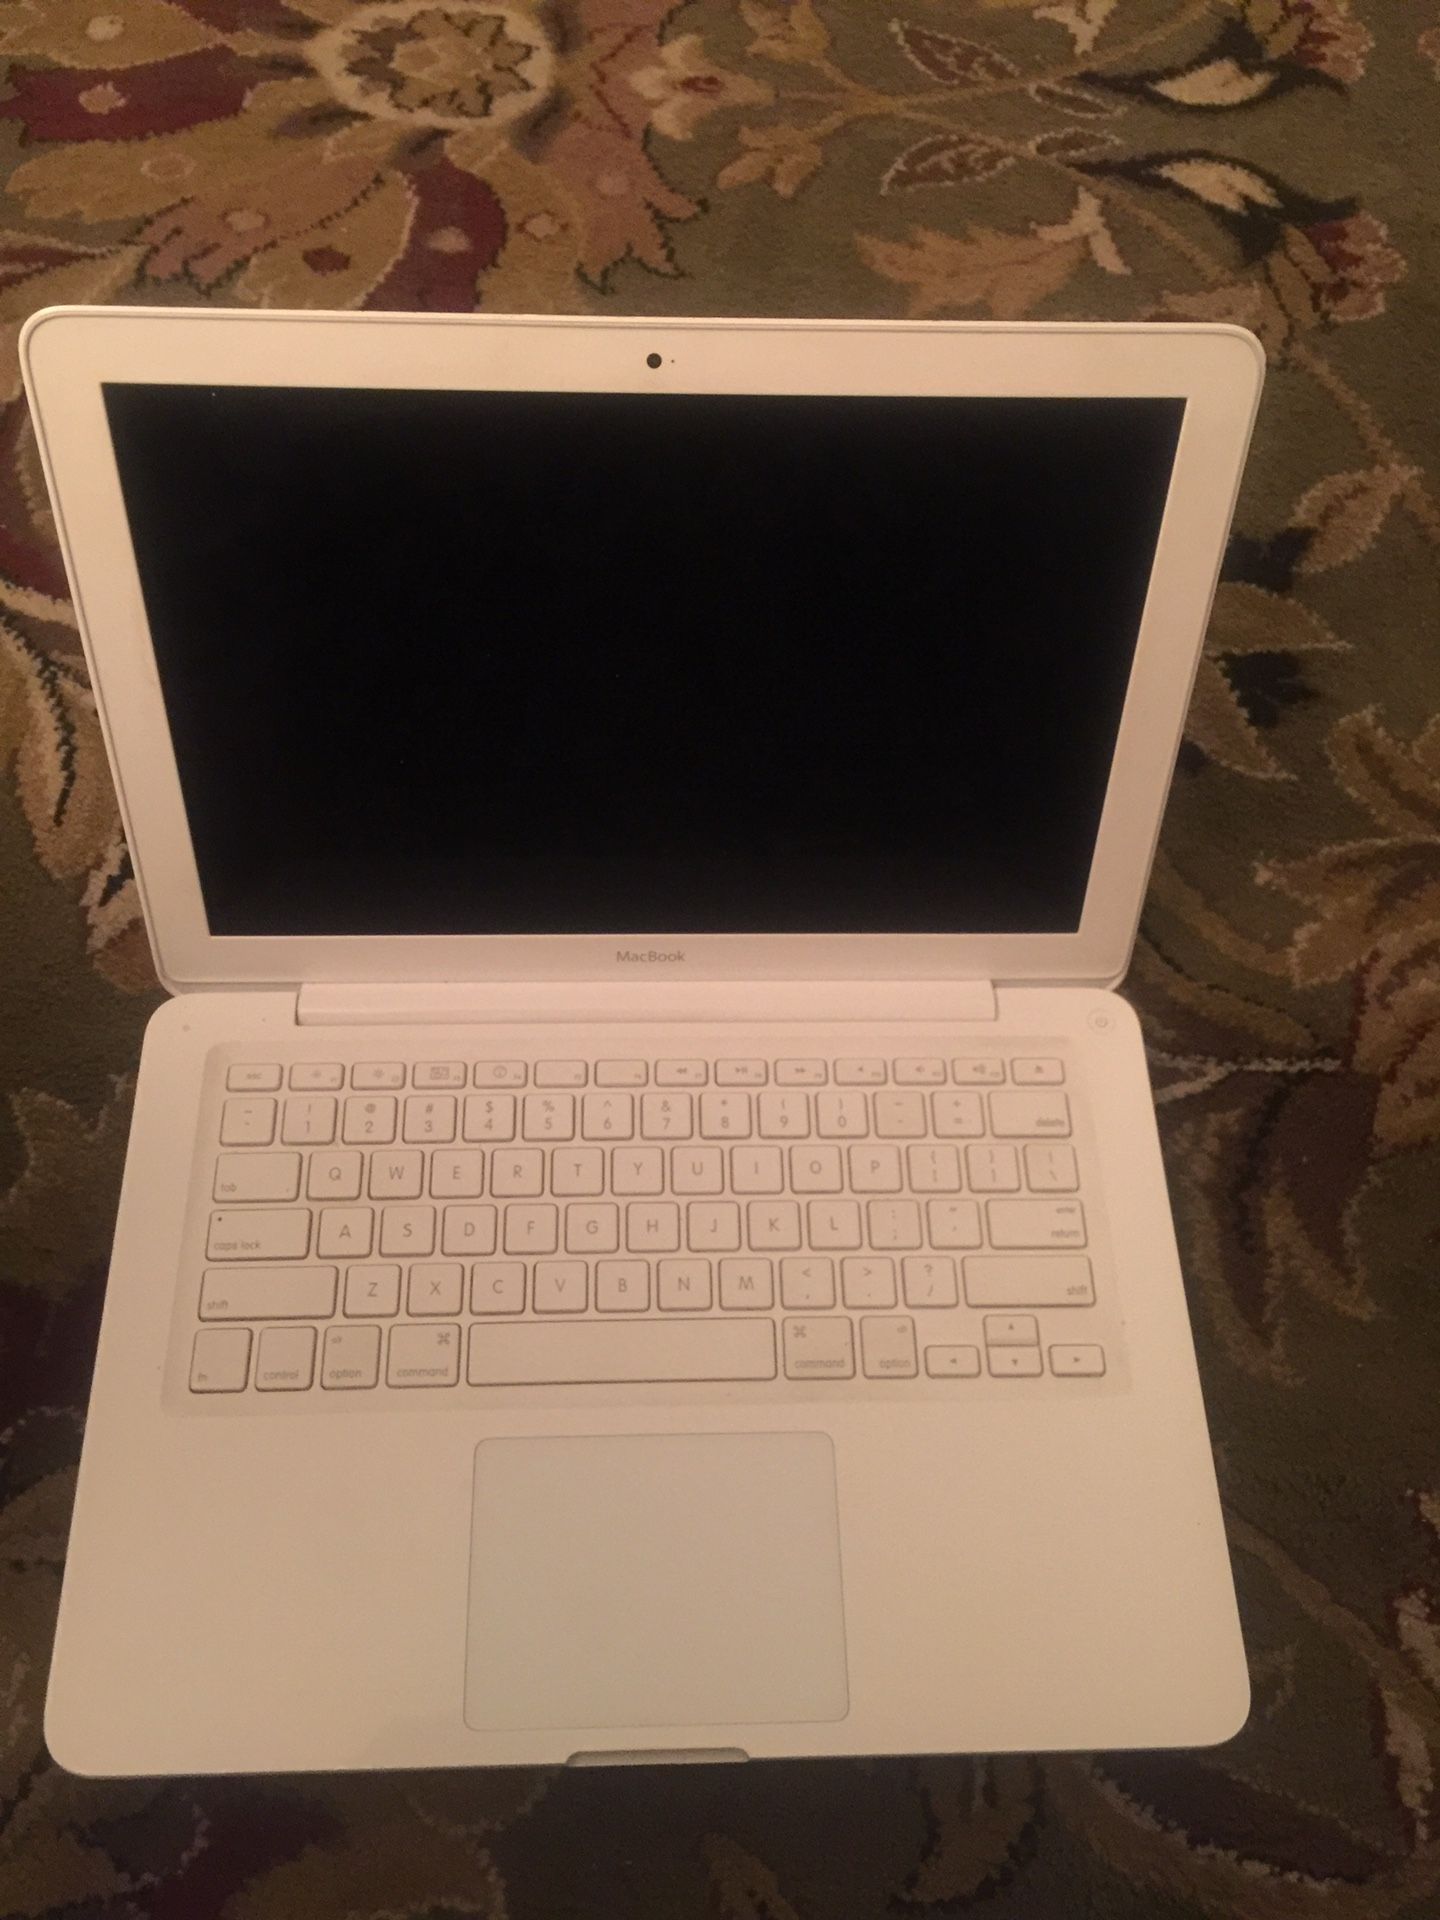 2010 unibody MacBook serious only please read